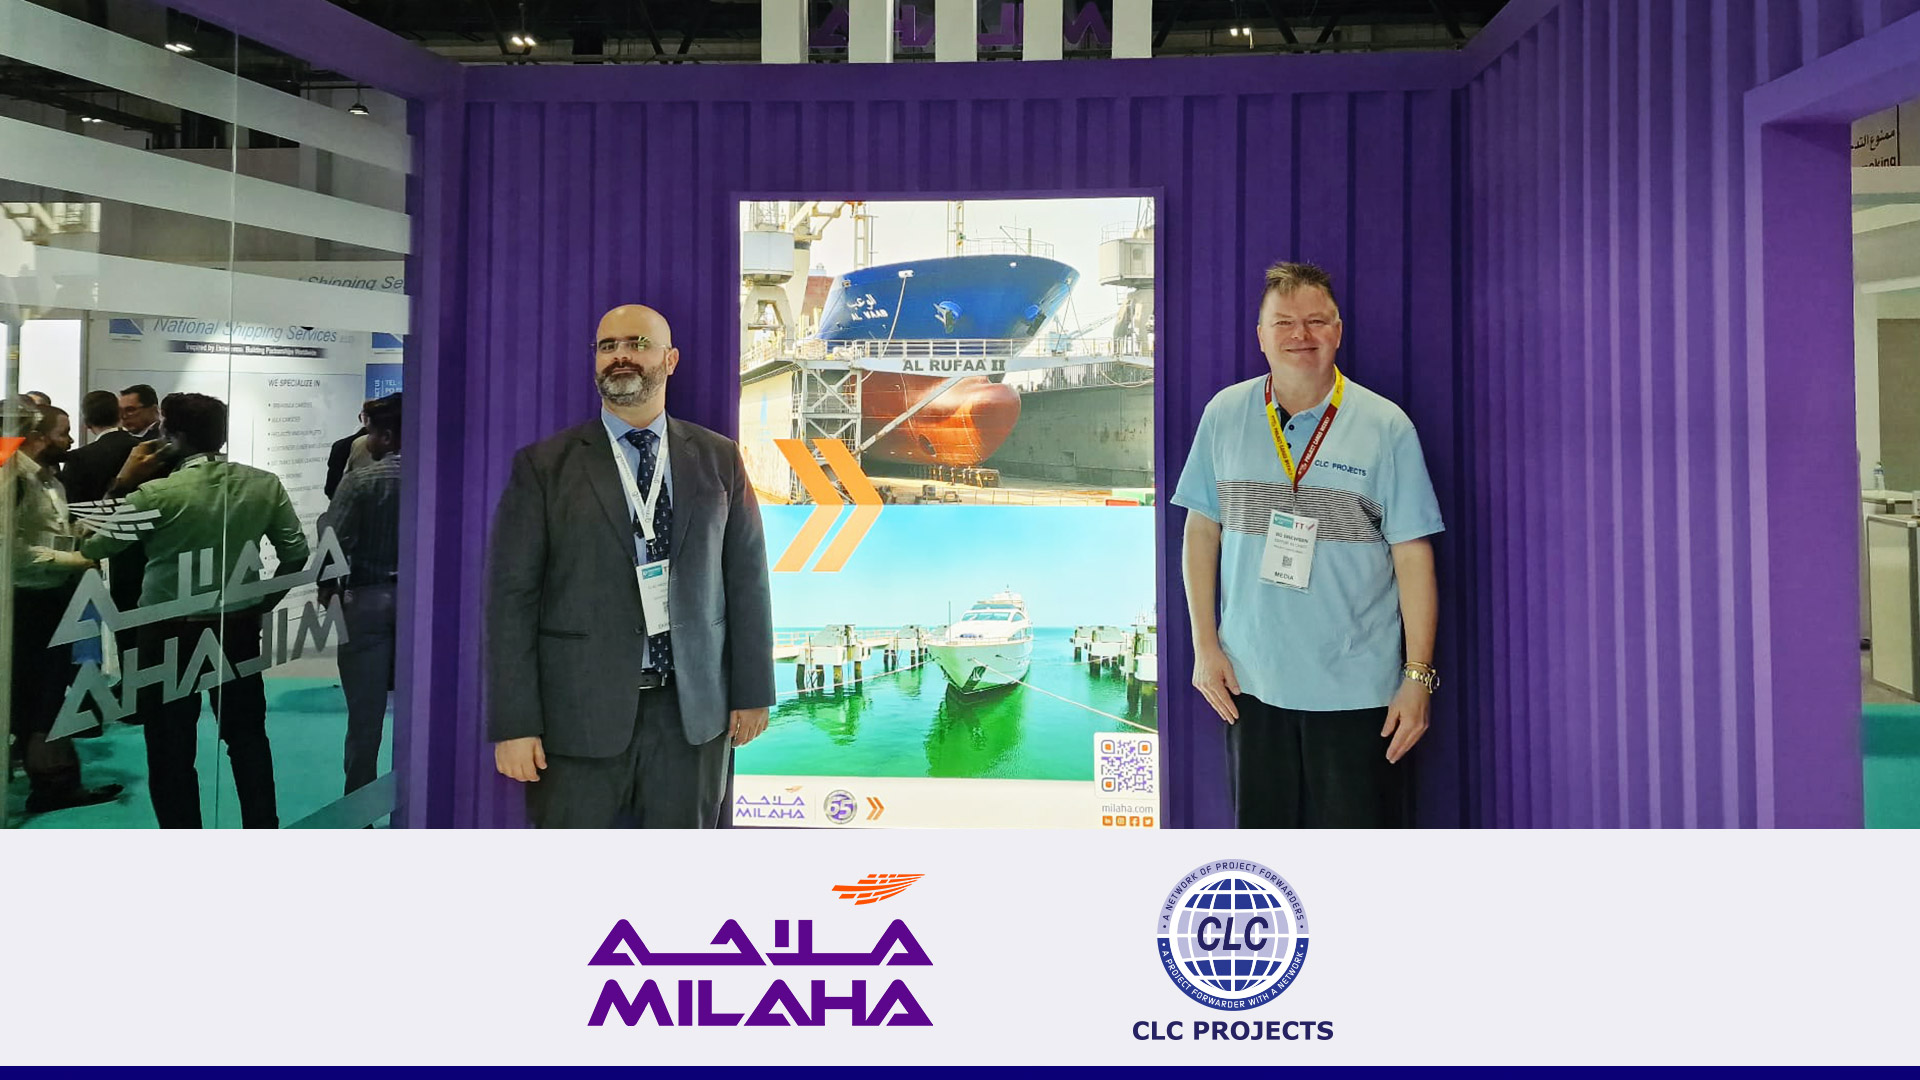 CLC Projects Chairman with Mr. Elias Abou Jawdeh of Milaha Qatar Navigation Q.P.S.C. at Breakbulk Middle East in Dubai